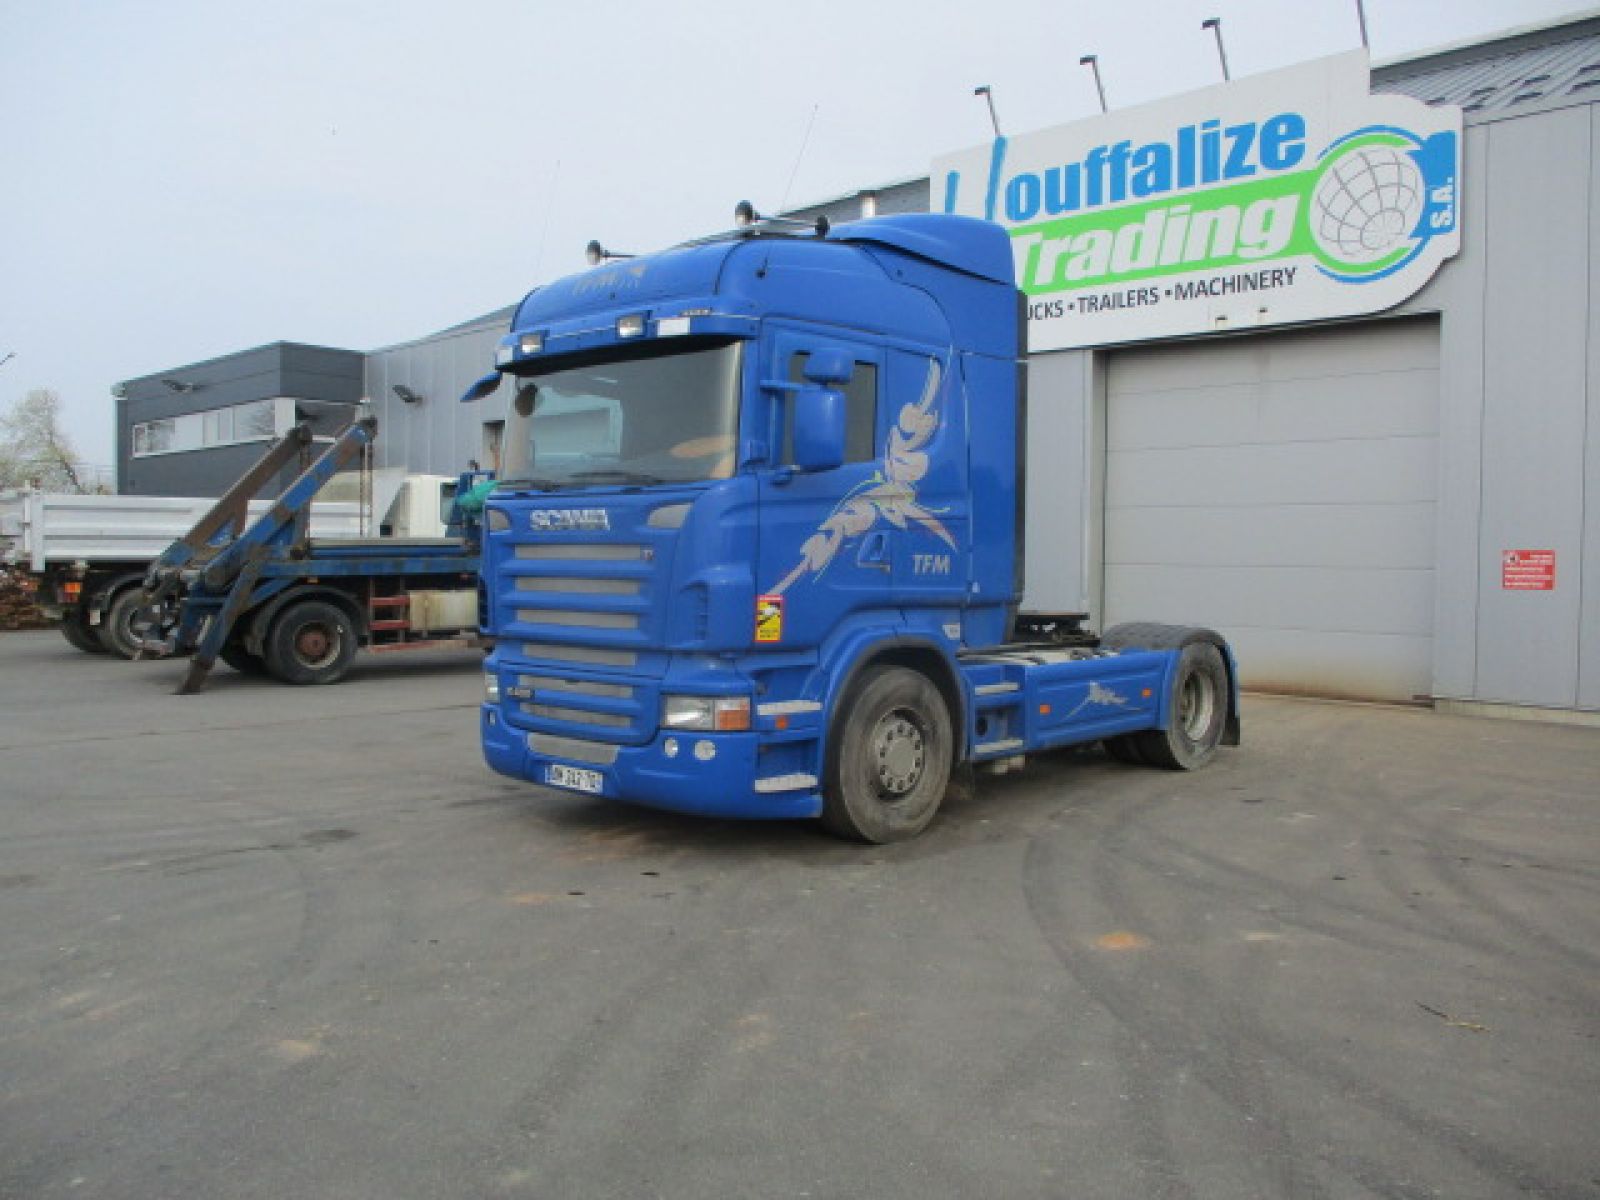 Vente occasion Tracteur - SCANIA R480  TRACTEUR (Belgique - Europe) - Houffalize Trading s.a.